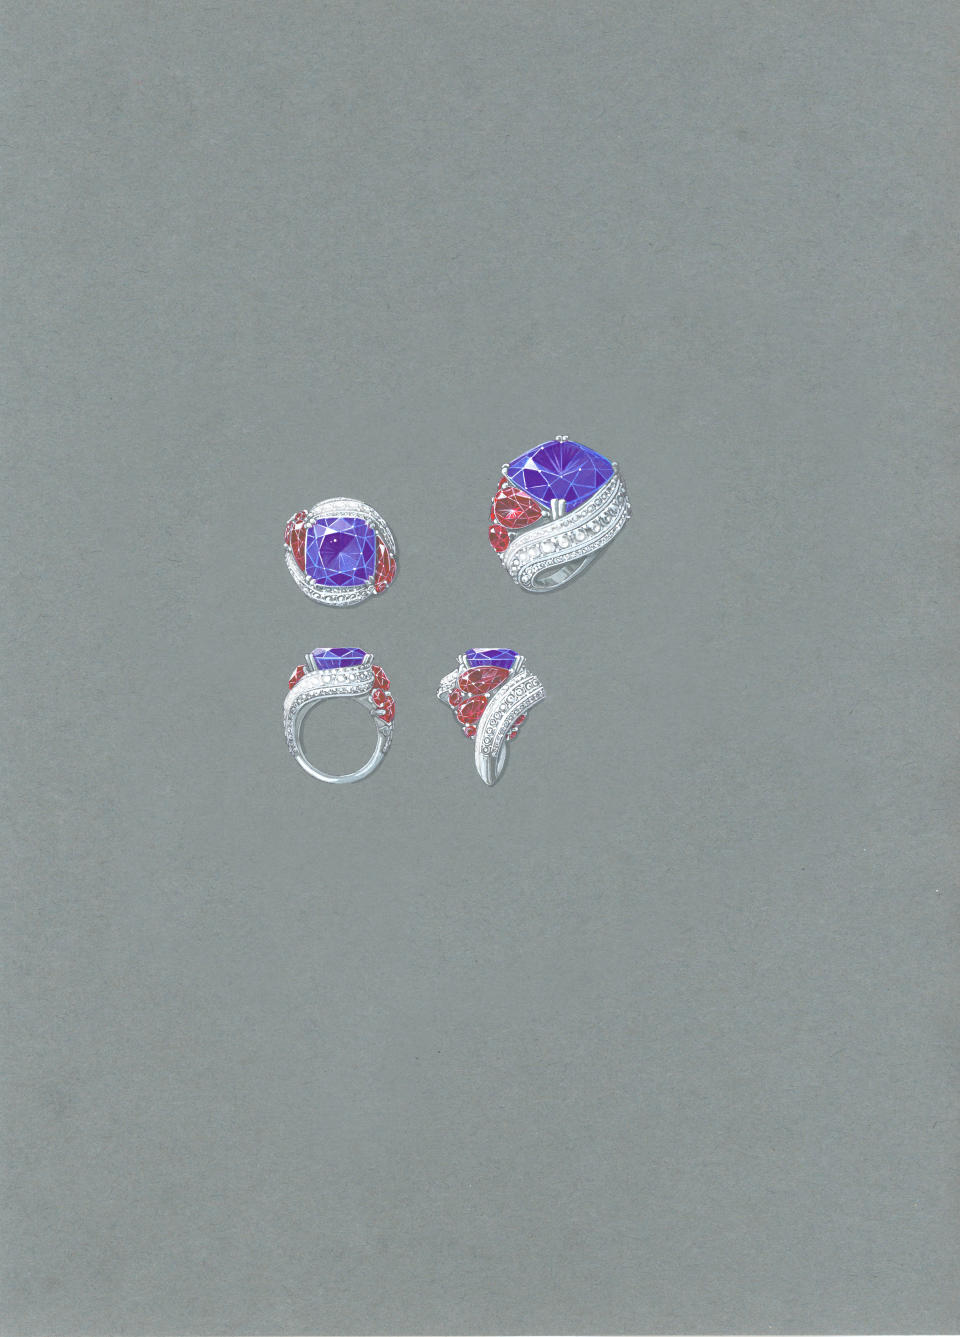 A gouache painting of the spinel coronation ring by David Morris.<br><br>